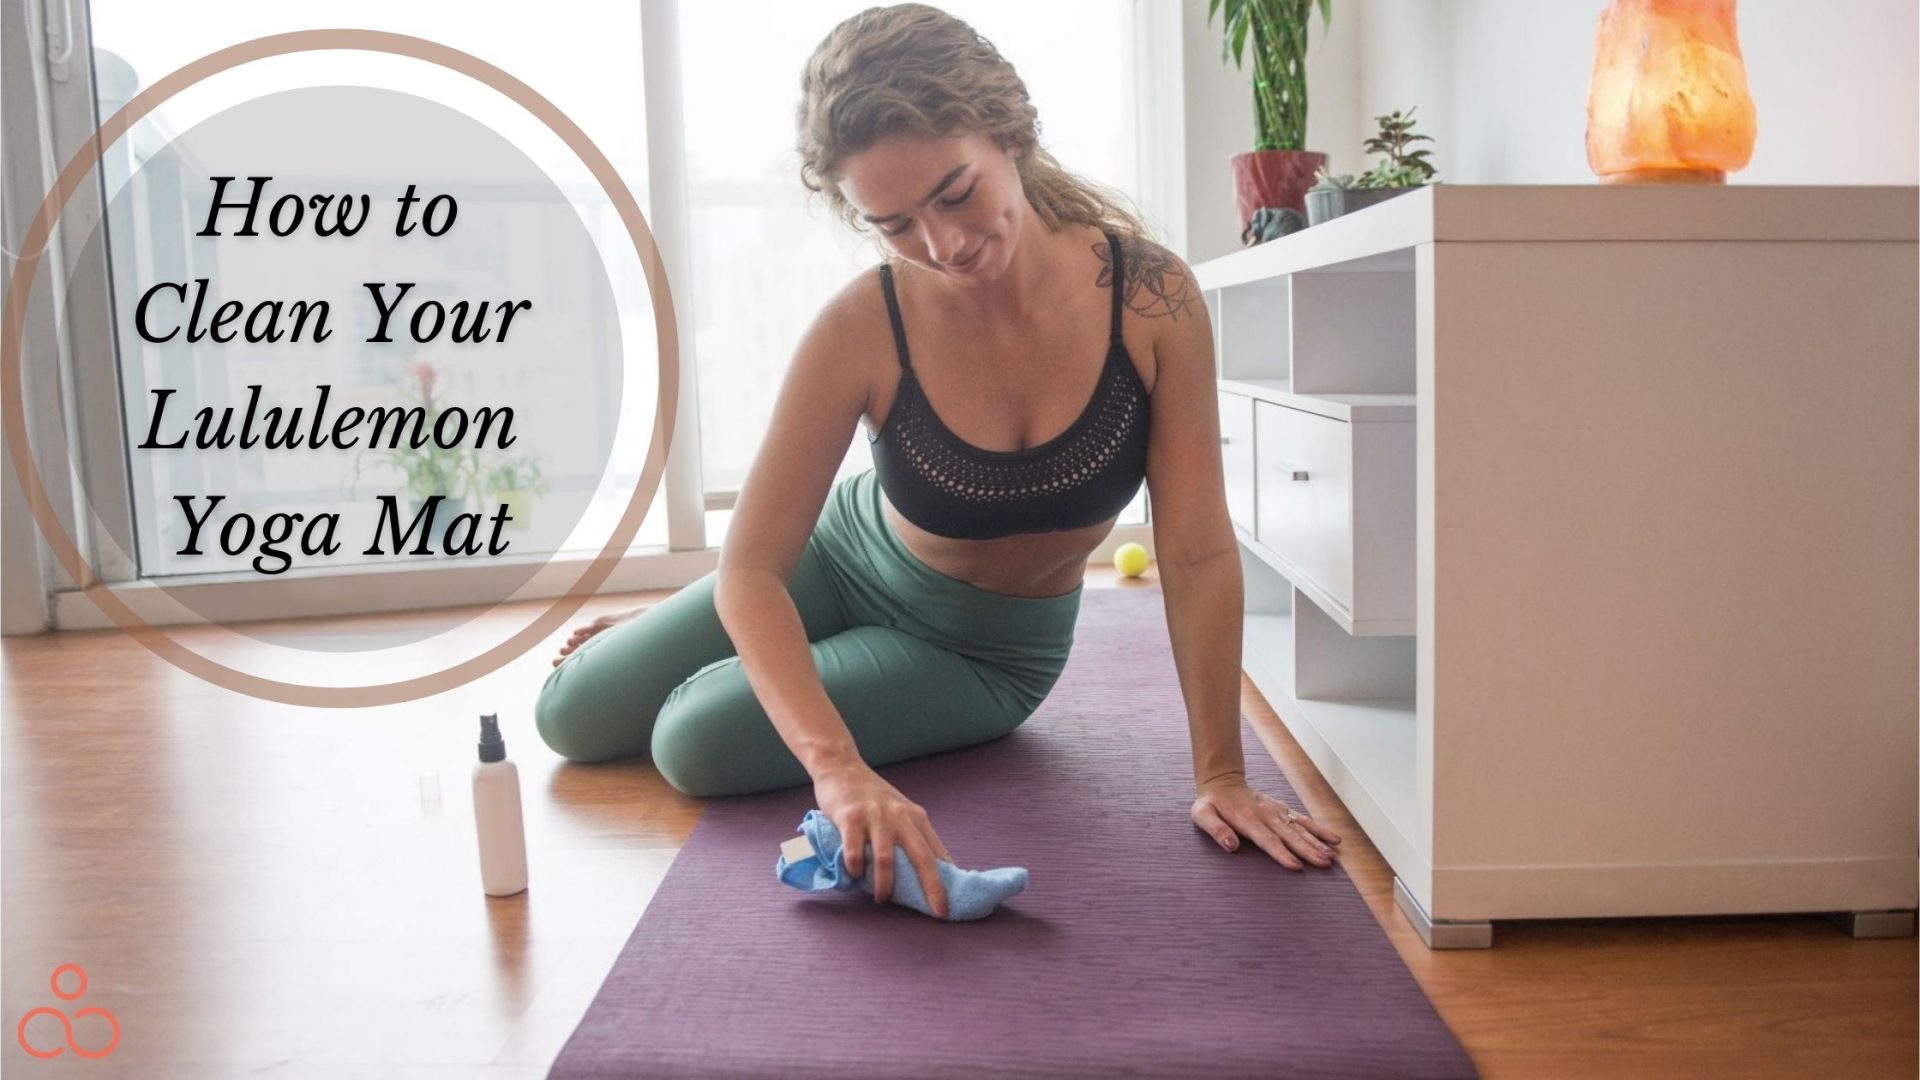 How to Clean a Lululemon Yoga Mat?